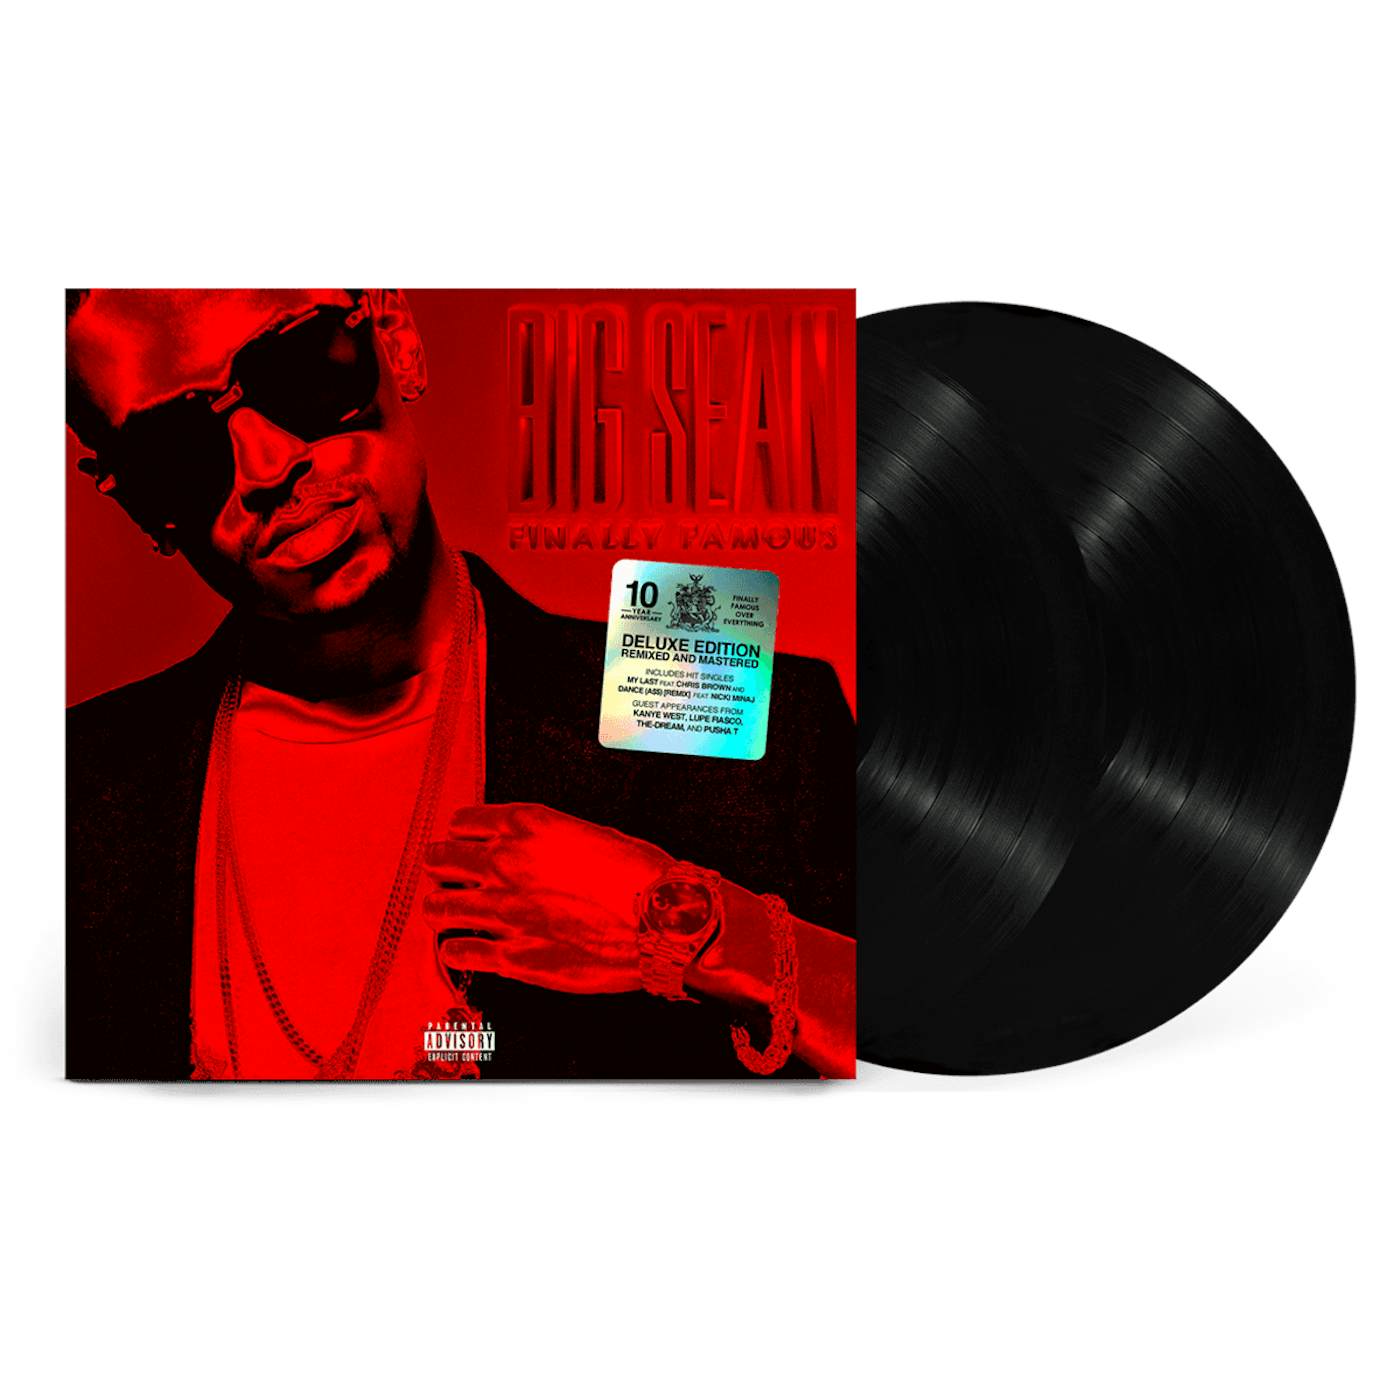 Big Sean Finally Famous 10th Anniversary Deluxe Edition (Remixed & Remastered) Double LP (Vinyl)